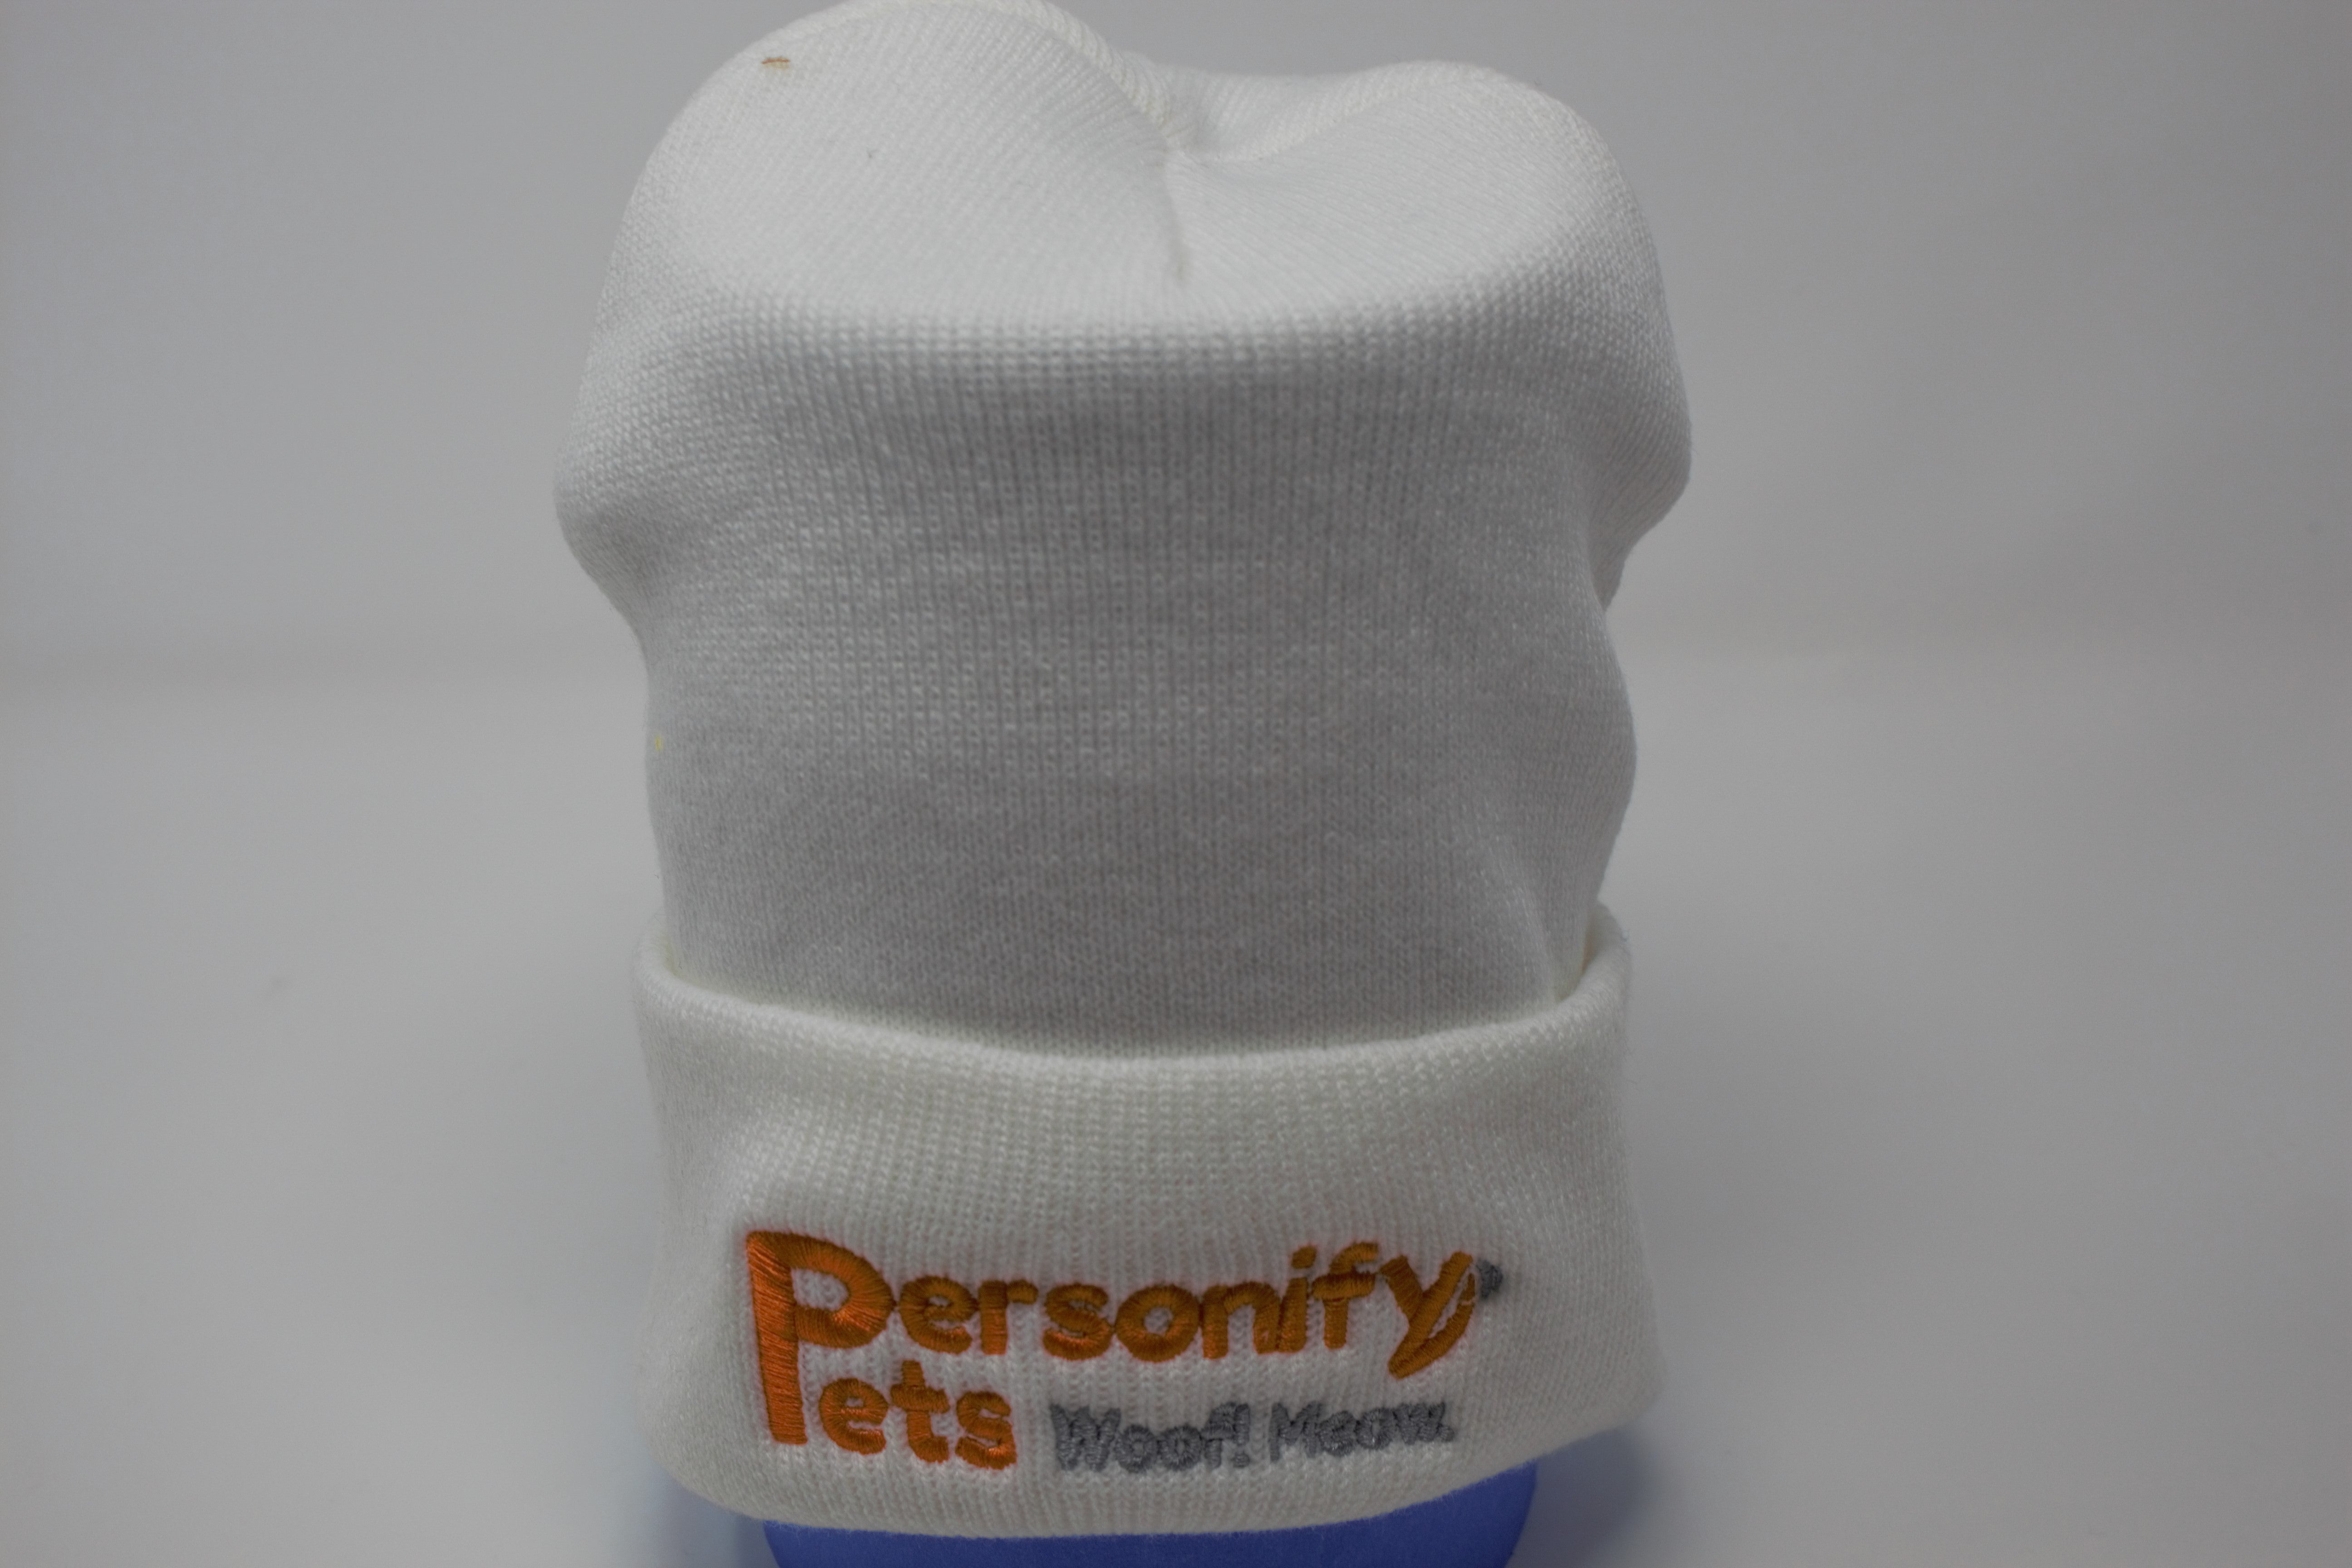 Personify Pets Beanie Hat